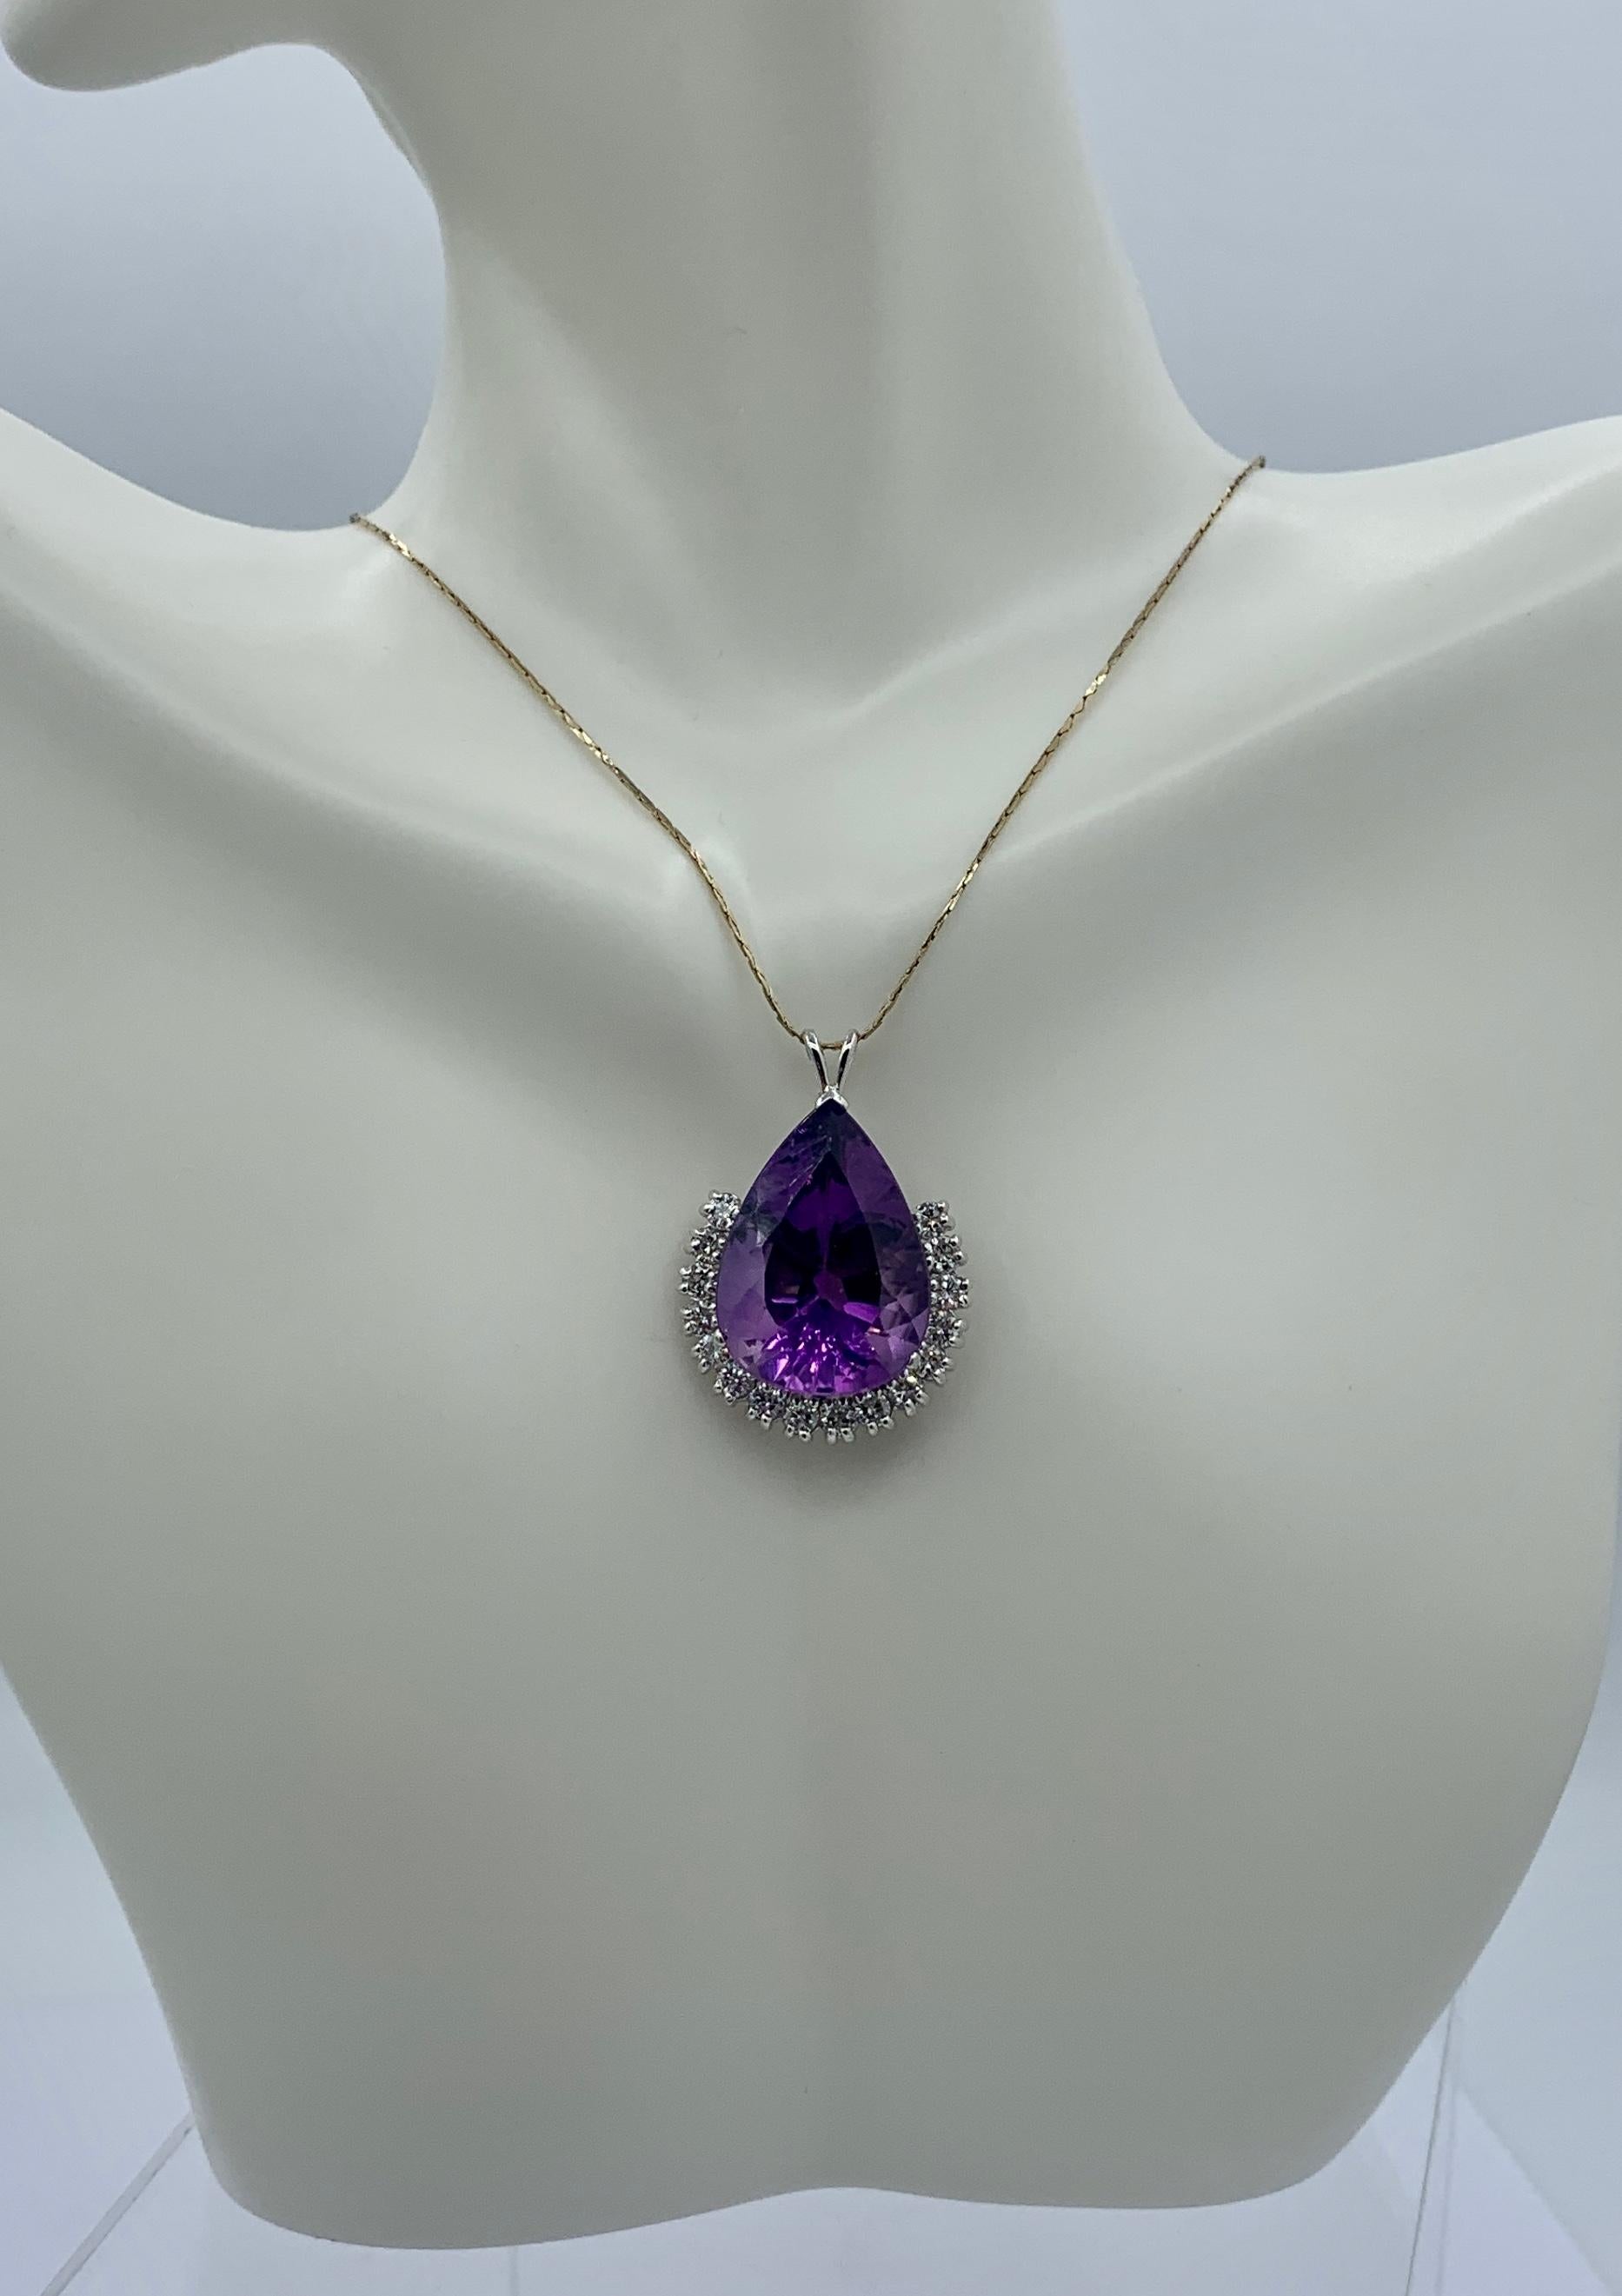 THIS IS A MAGNIFICENT JEWEL.  THE STUNNING MONUMENTAL 18 CARAT PEAR SHAPED FACETED SIBERIAN AMETHYST OF GREAT BEAUTY IS SURROUNDED BY 16 DIAMONDS TOTALING APPROXIMATELY 1.5 CT IN A CLASSIC 10K WHITE GOLD SETTING.
The breathtaking jewel features a